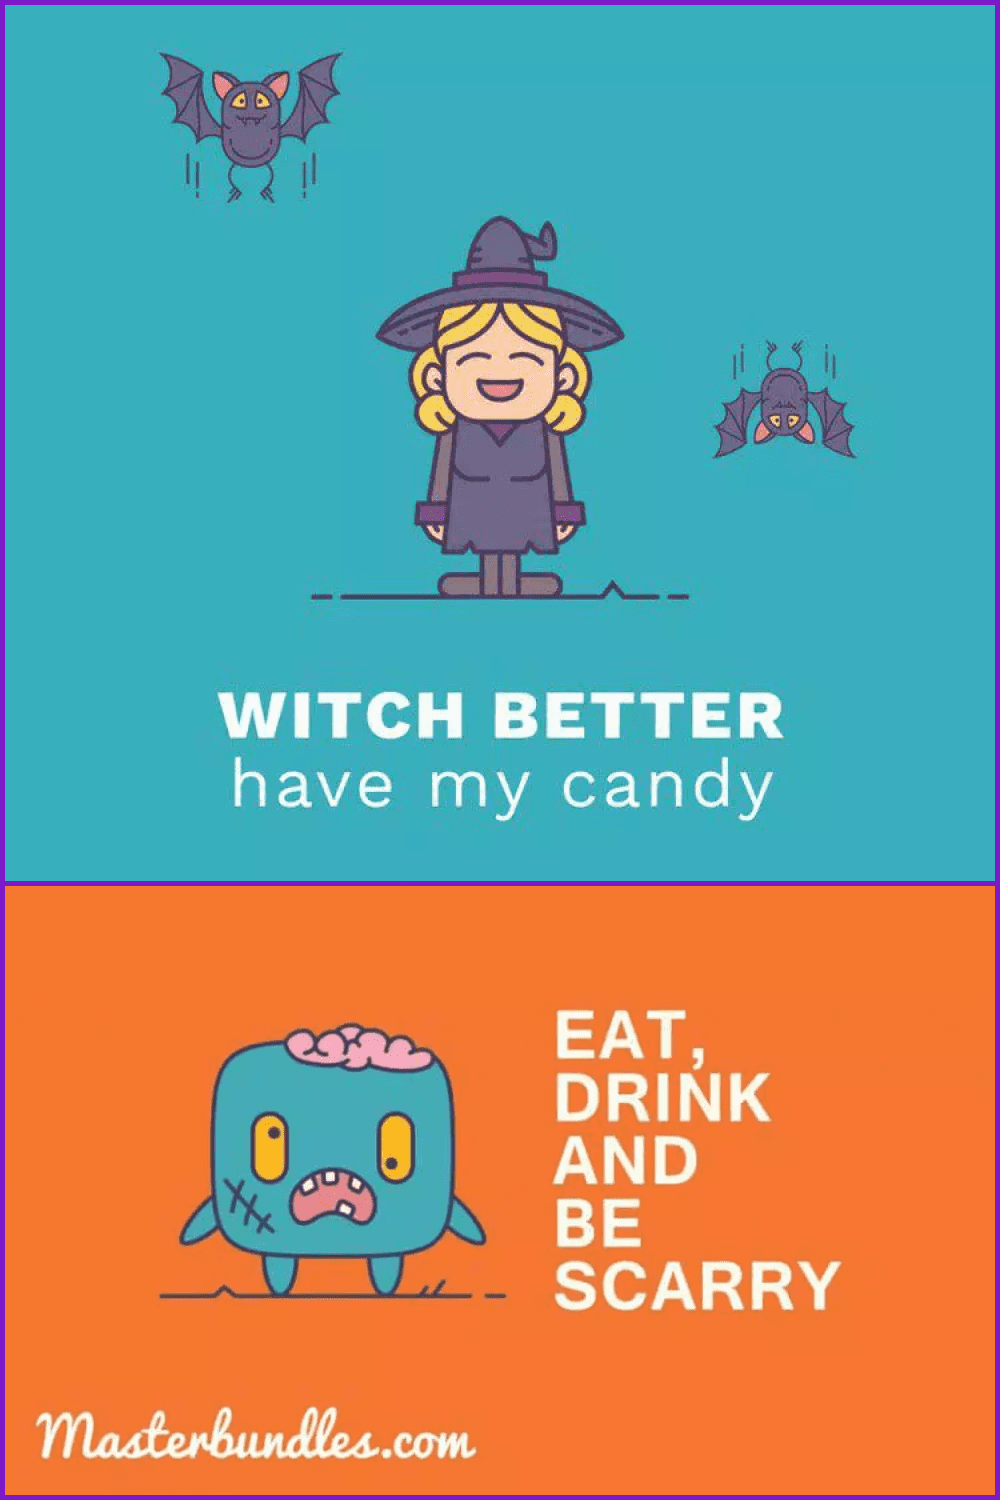 Cute cartoon witch and monster on green and orange background.